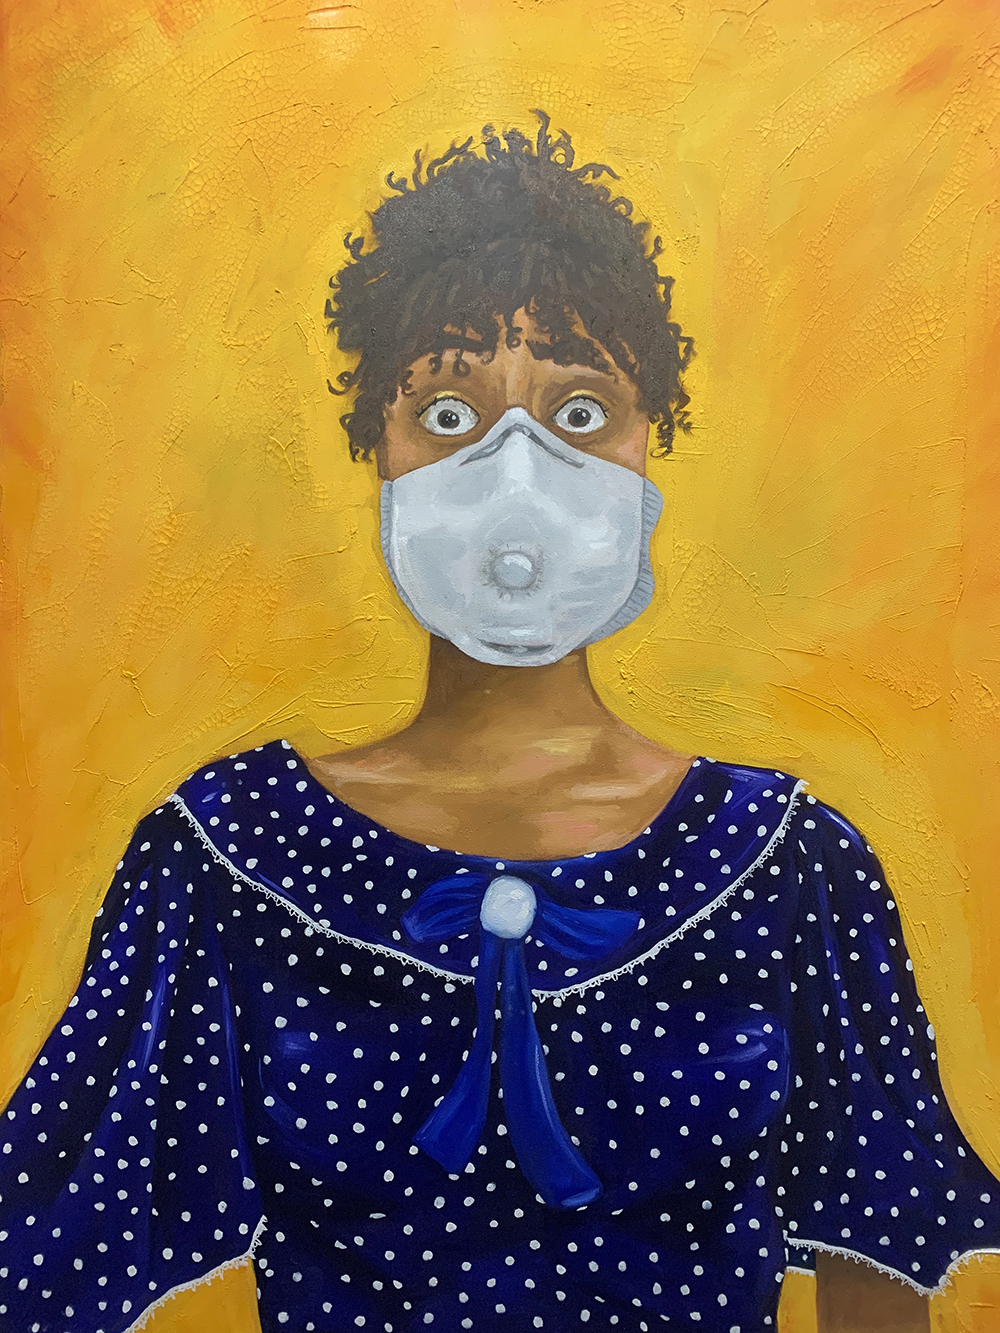 Quarantine Self Portrait (oil and crackle paste on canvas, 38” x 50”) by first-year student Ashley Waithe